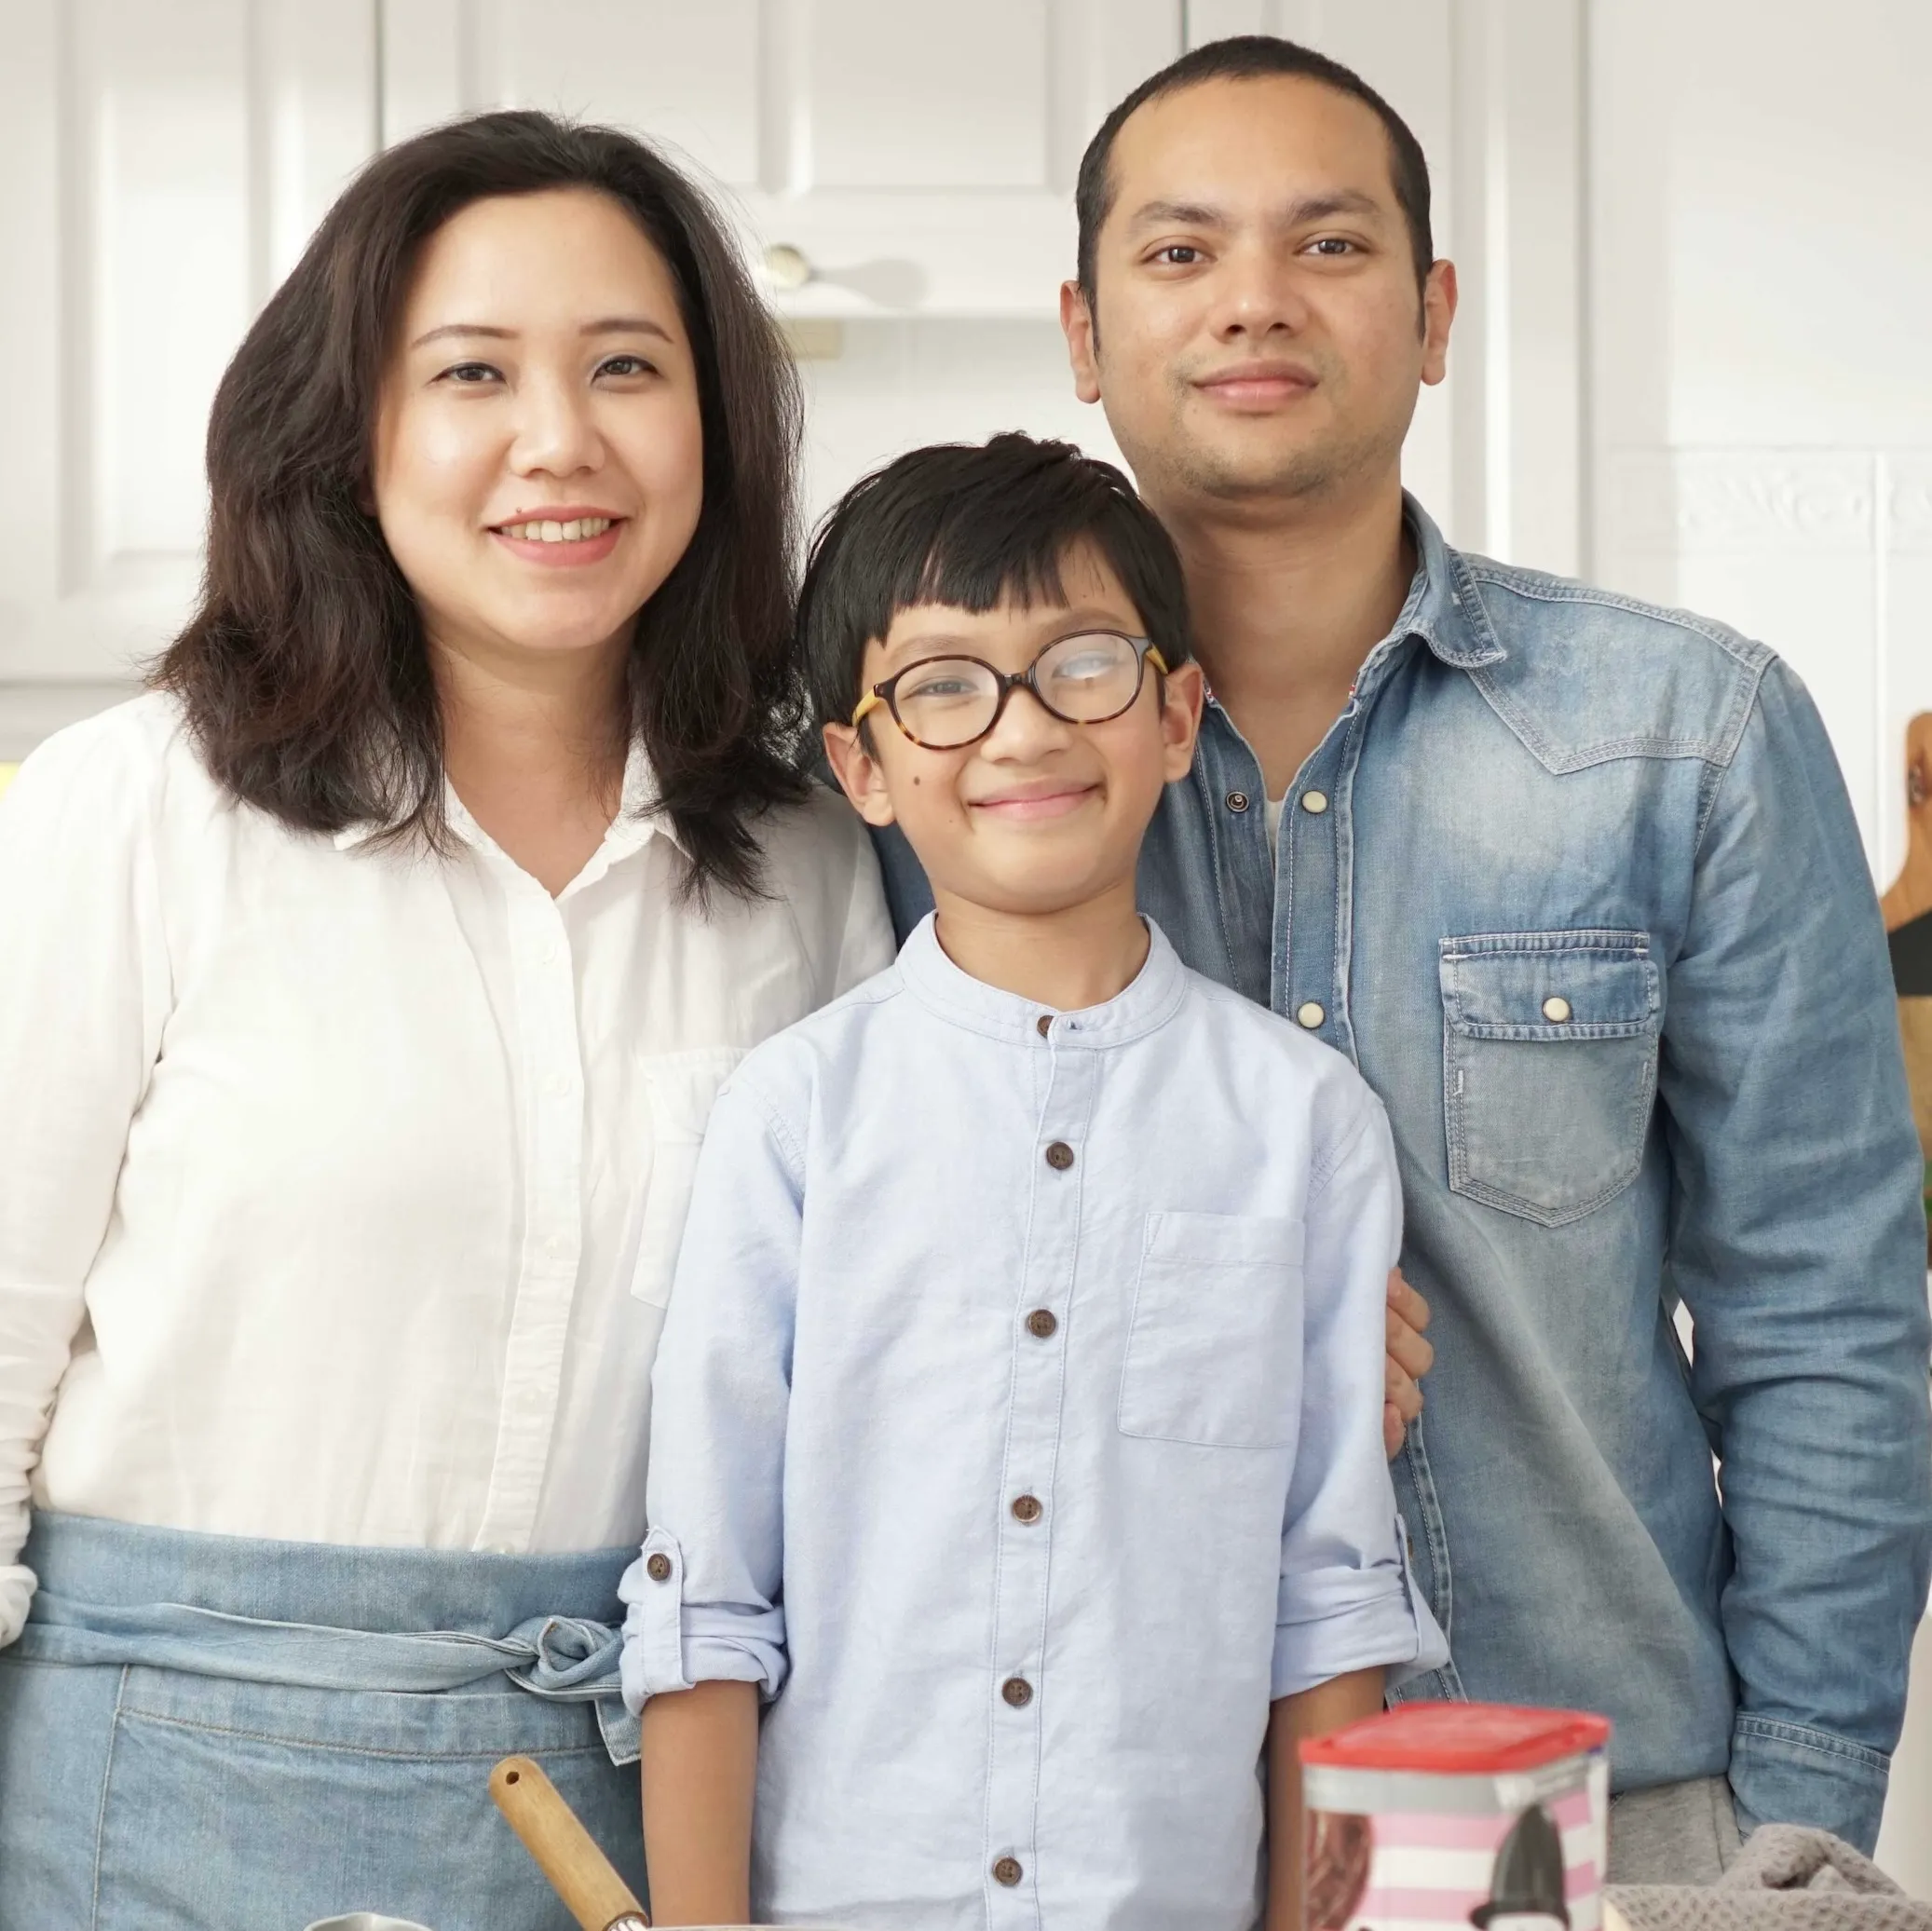 Khin and her family